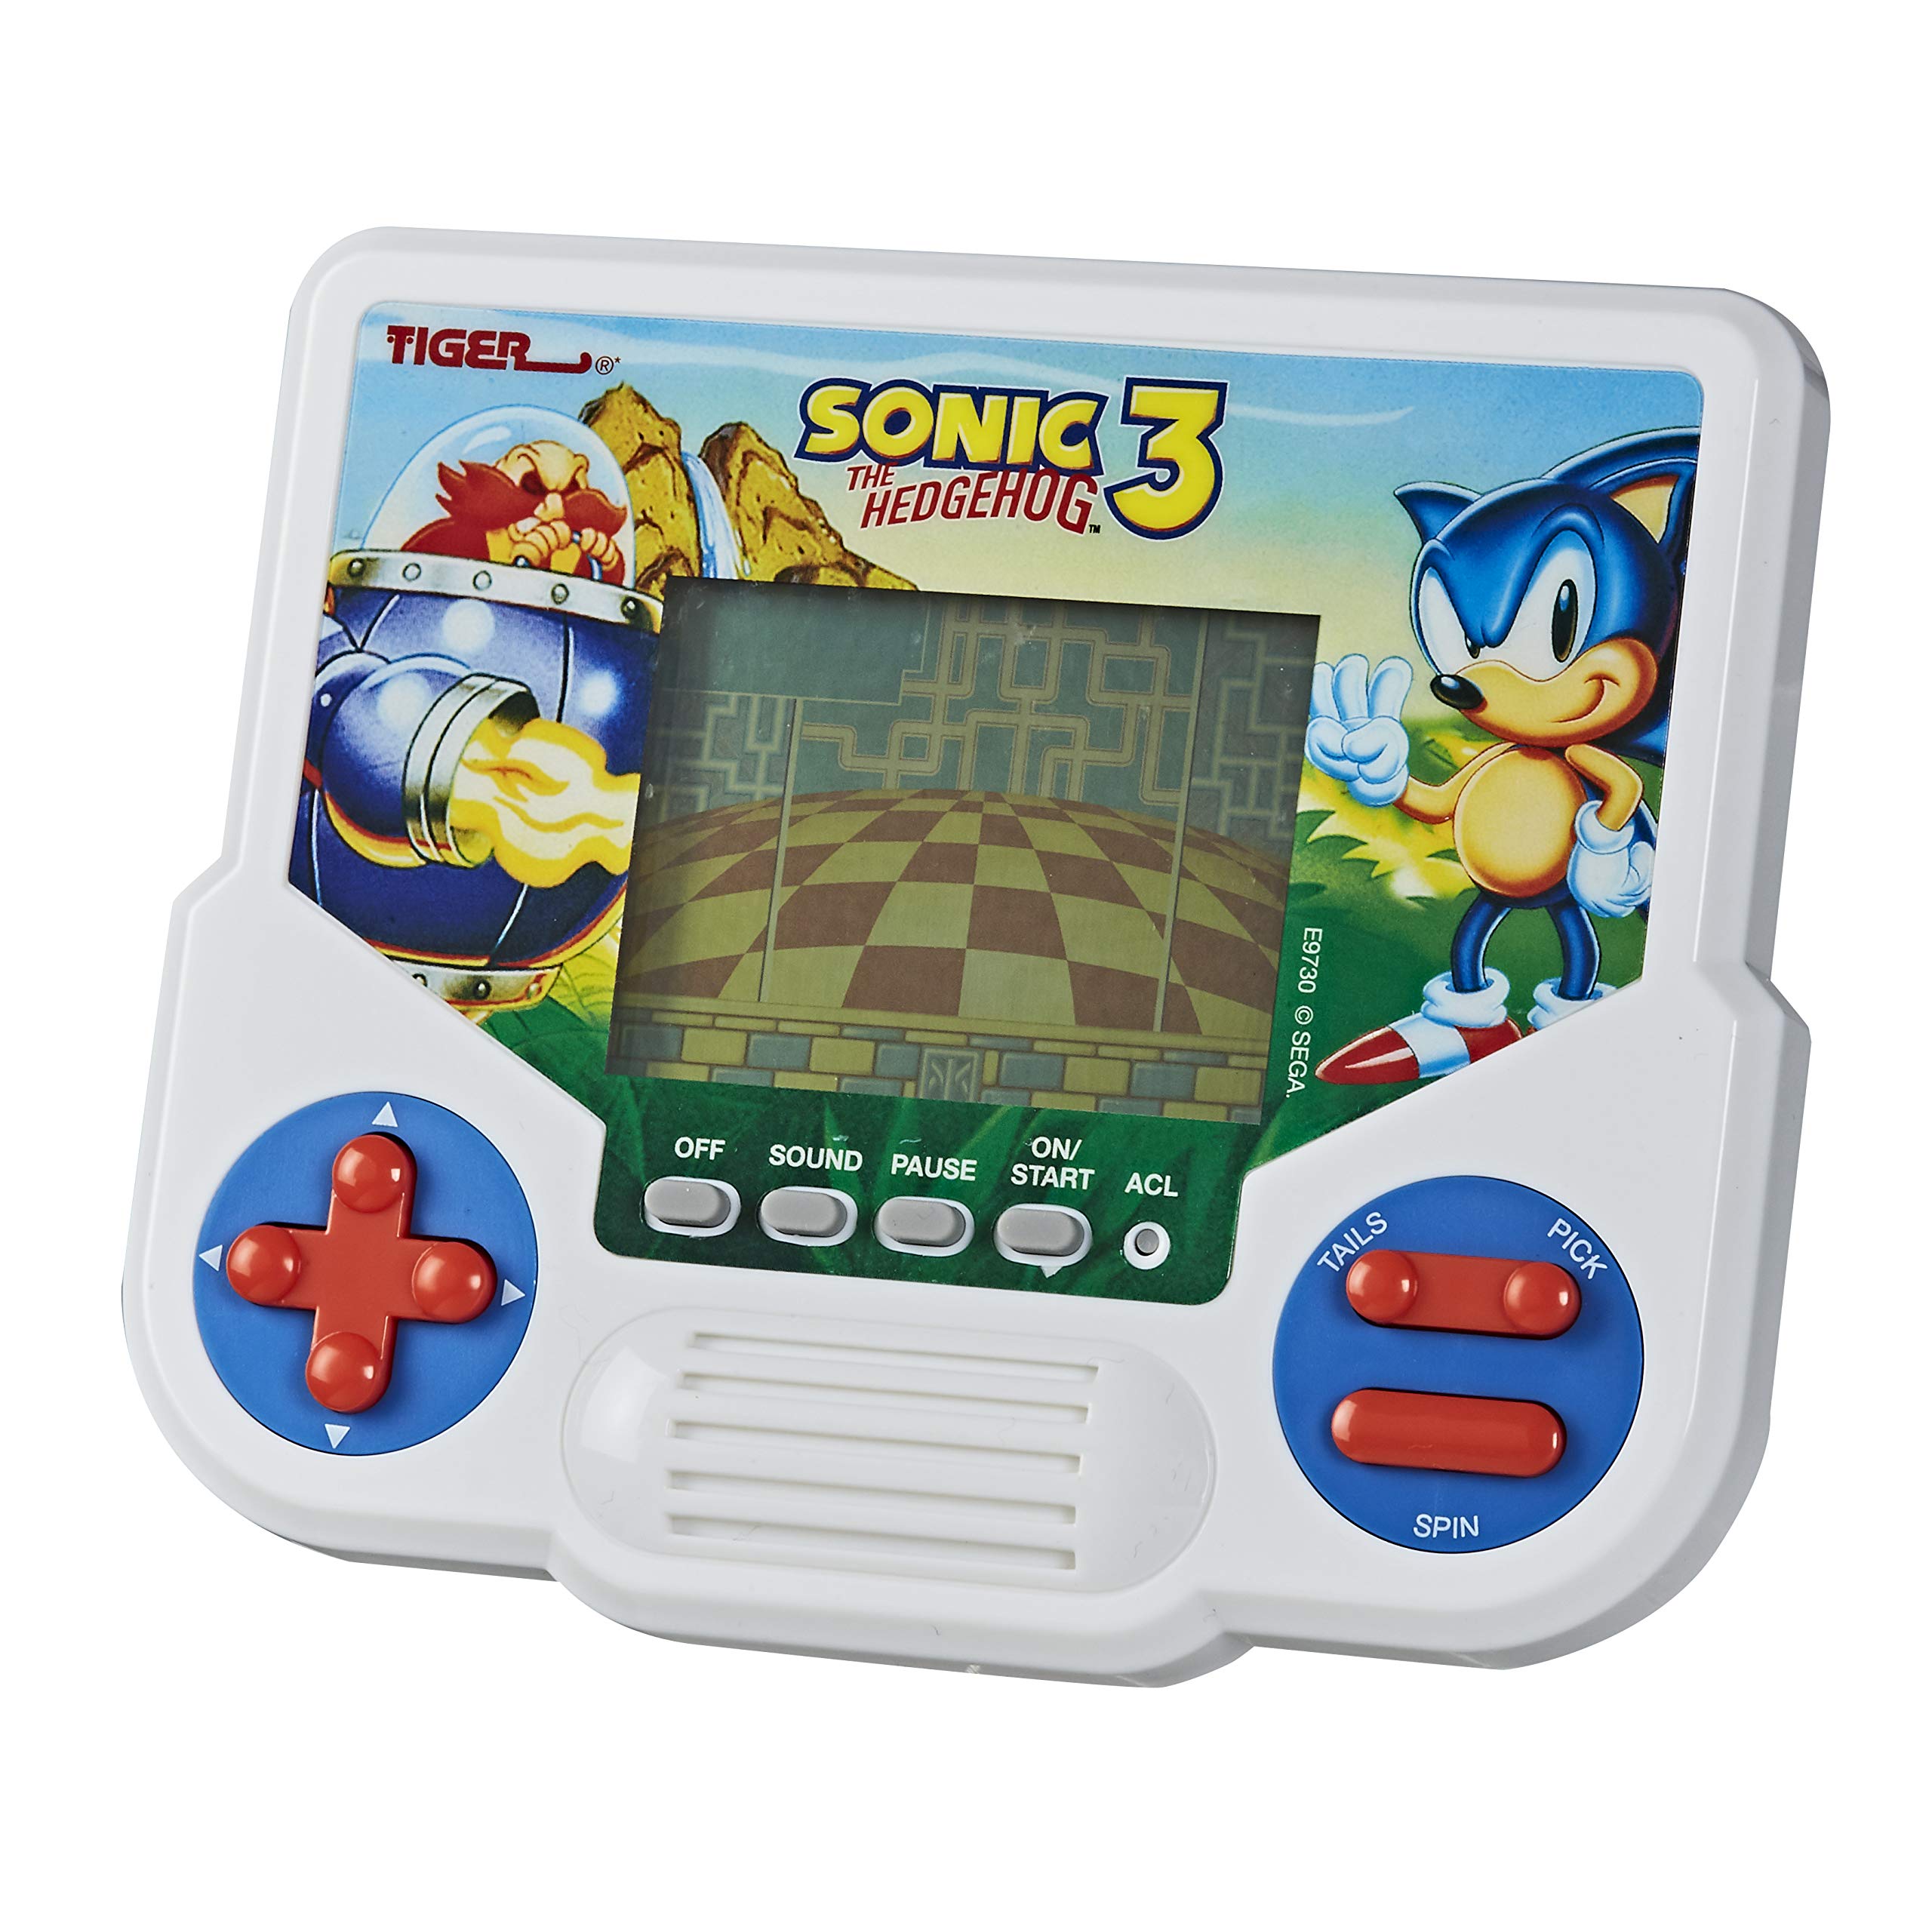 Hasbro Gaming Tiger Sonic The Hedgehog 3 Electronic LCD Video Game, Retro-Inspired Edition, Handheld 1-Player, Ages 8 and Up